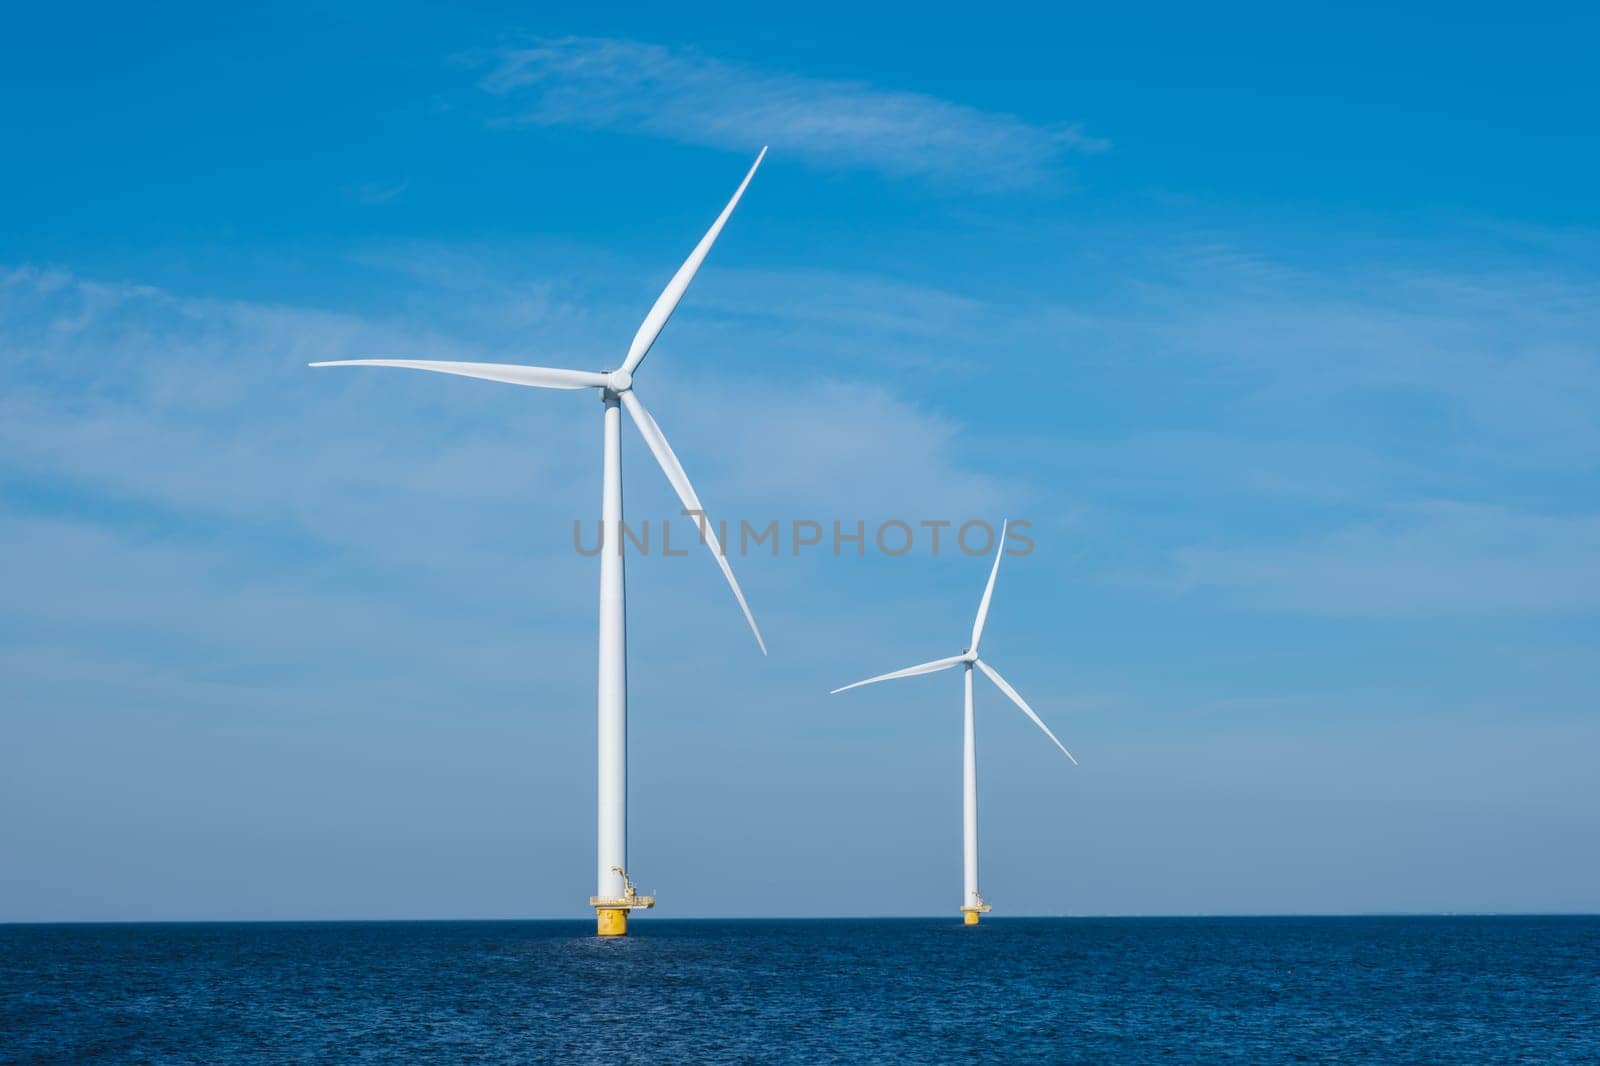 Three colossal wind turbines stand tall and majestic in the vast expanse of the ocean, harnessing the powerful energy of the wind to generate electricity. copy space, green energy in the Netherlands